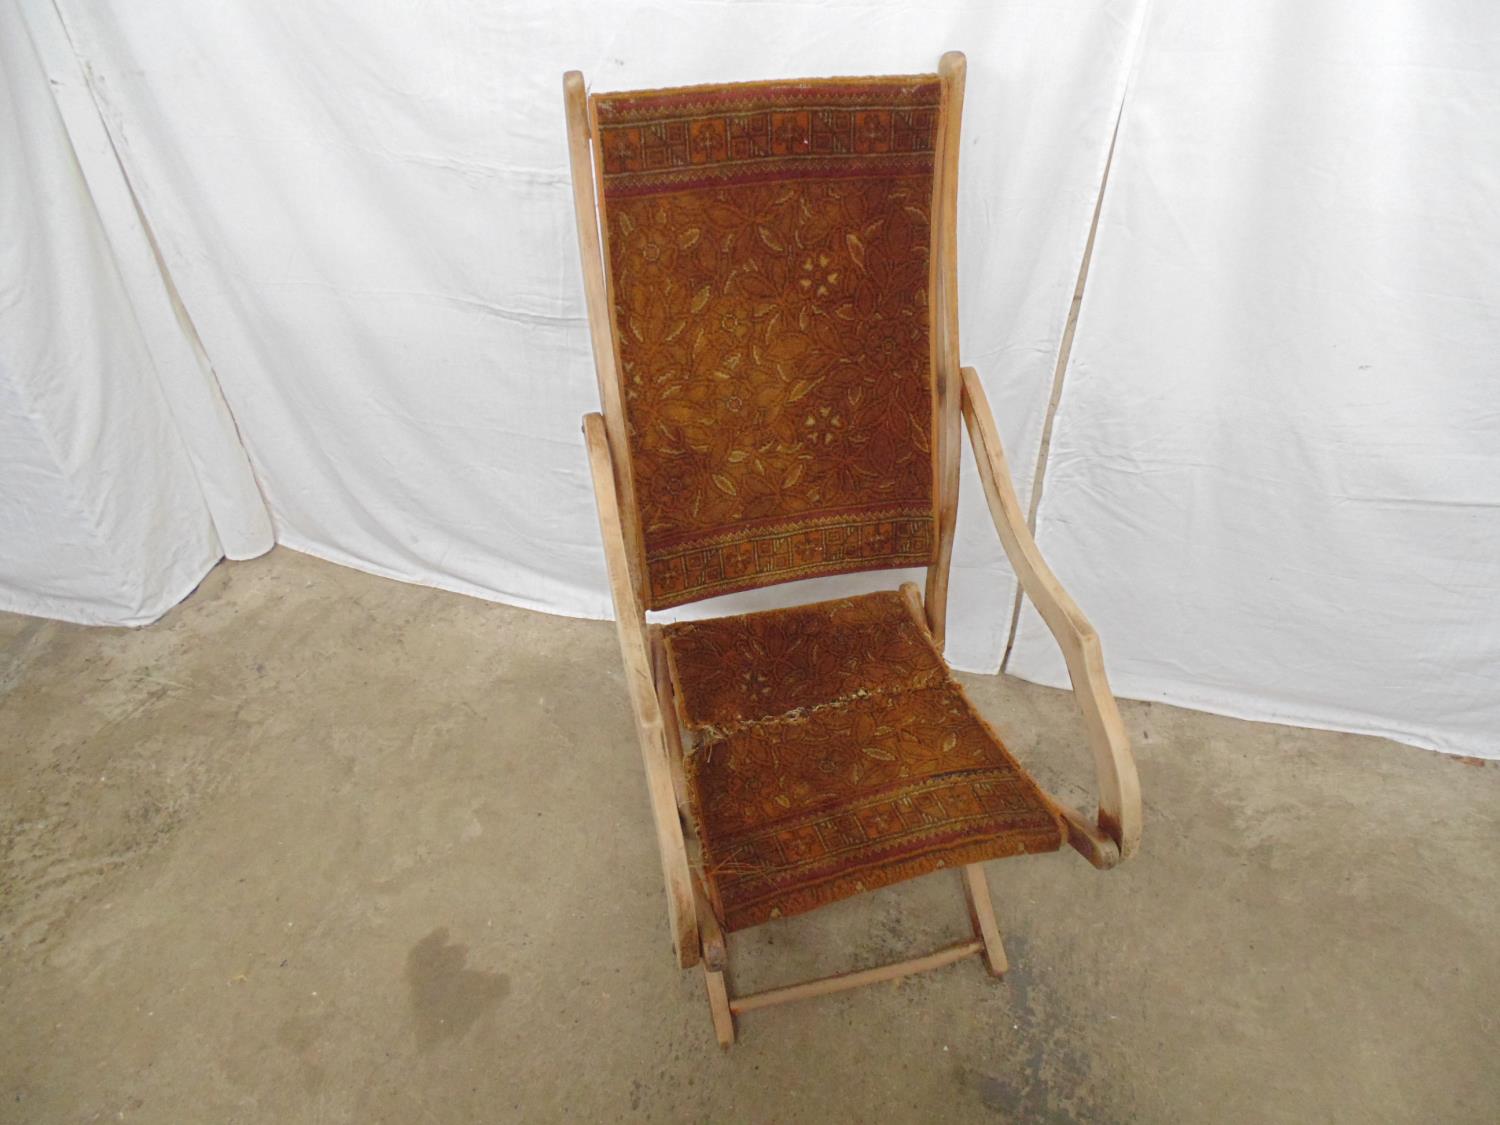 Folding beech campaign chair with floral upholstery - 44cm x 46cm x 98cm tall (upholstery and one